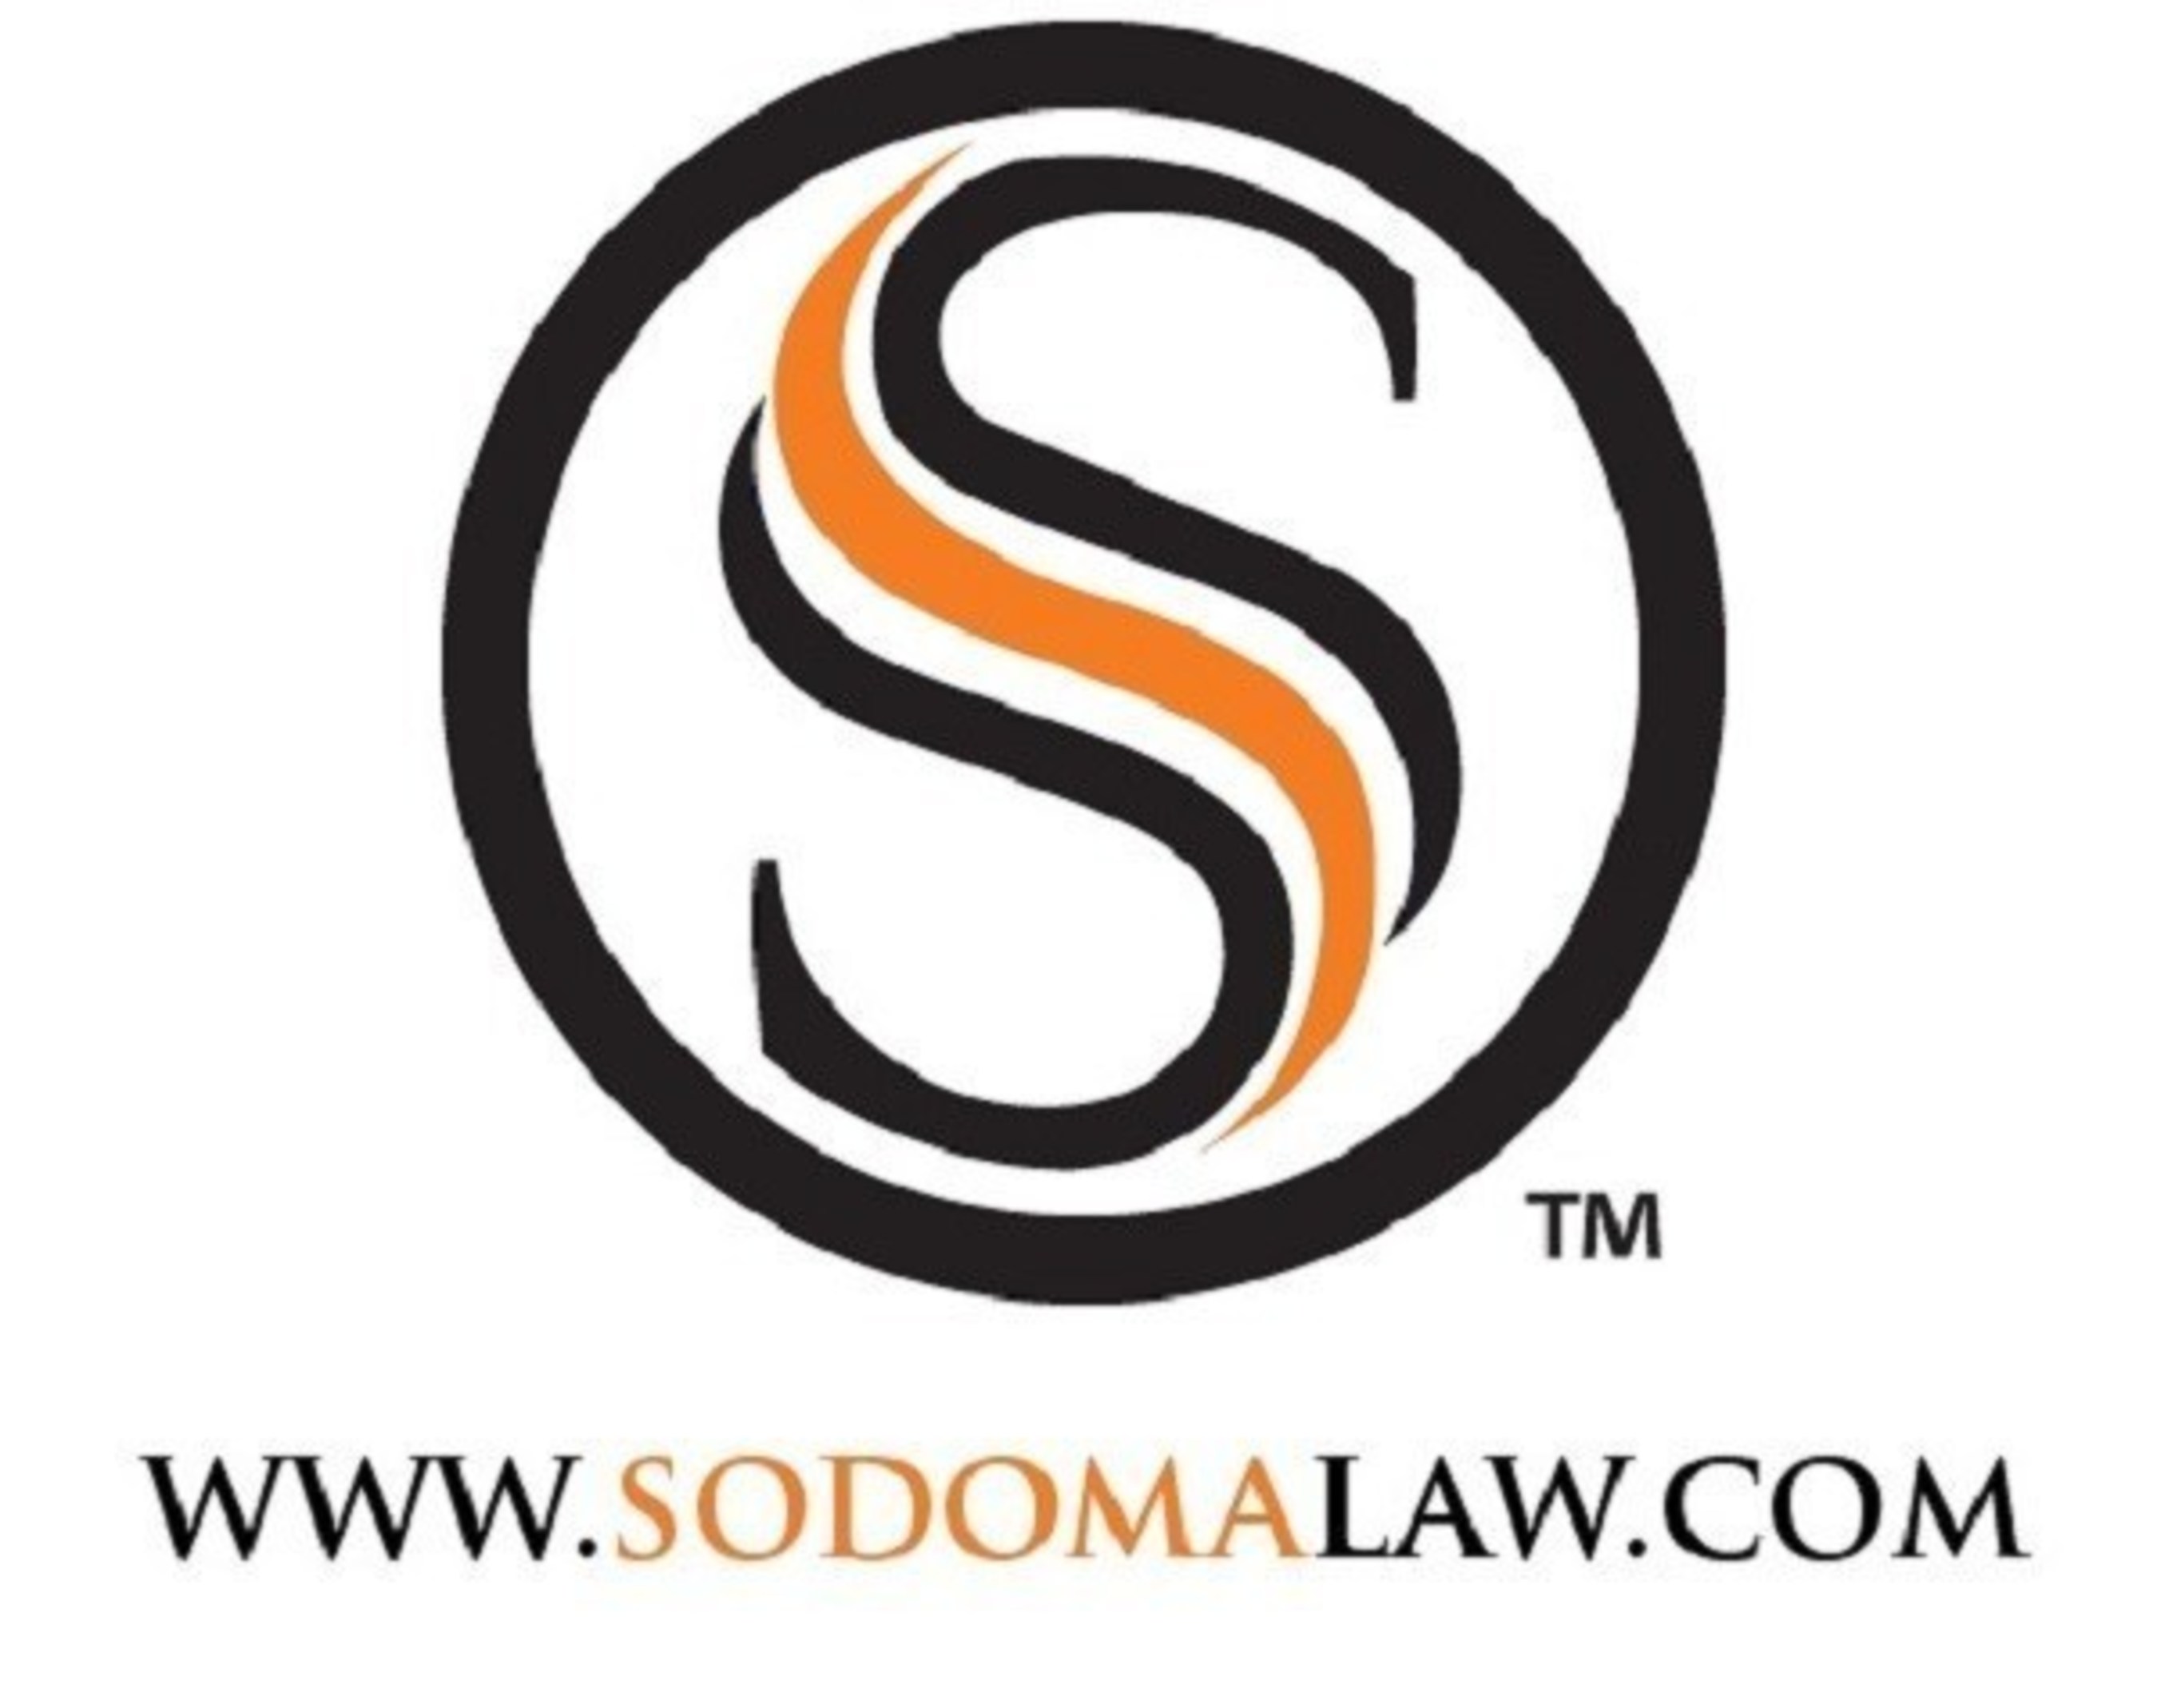 Sodoma Law, P.C. is headquartered just minutes from the courthouse in Charlotte, North Carolina. The firm's areas of practice include Family Law, Assisted Reproductive Technology, Appellate, Estate Planning, and Business Law.